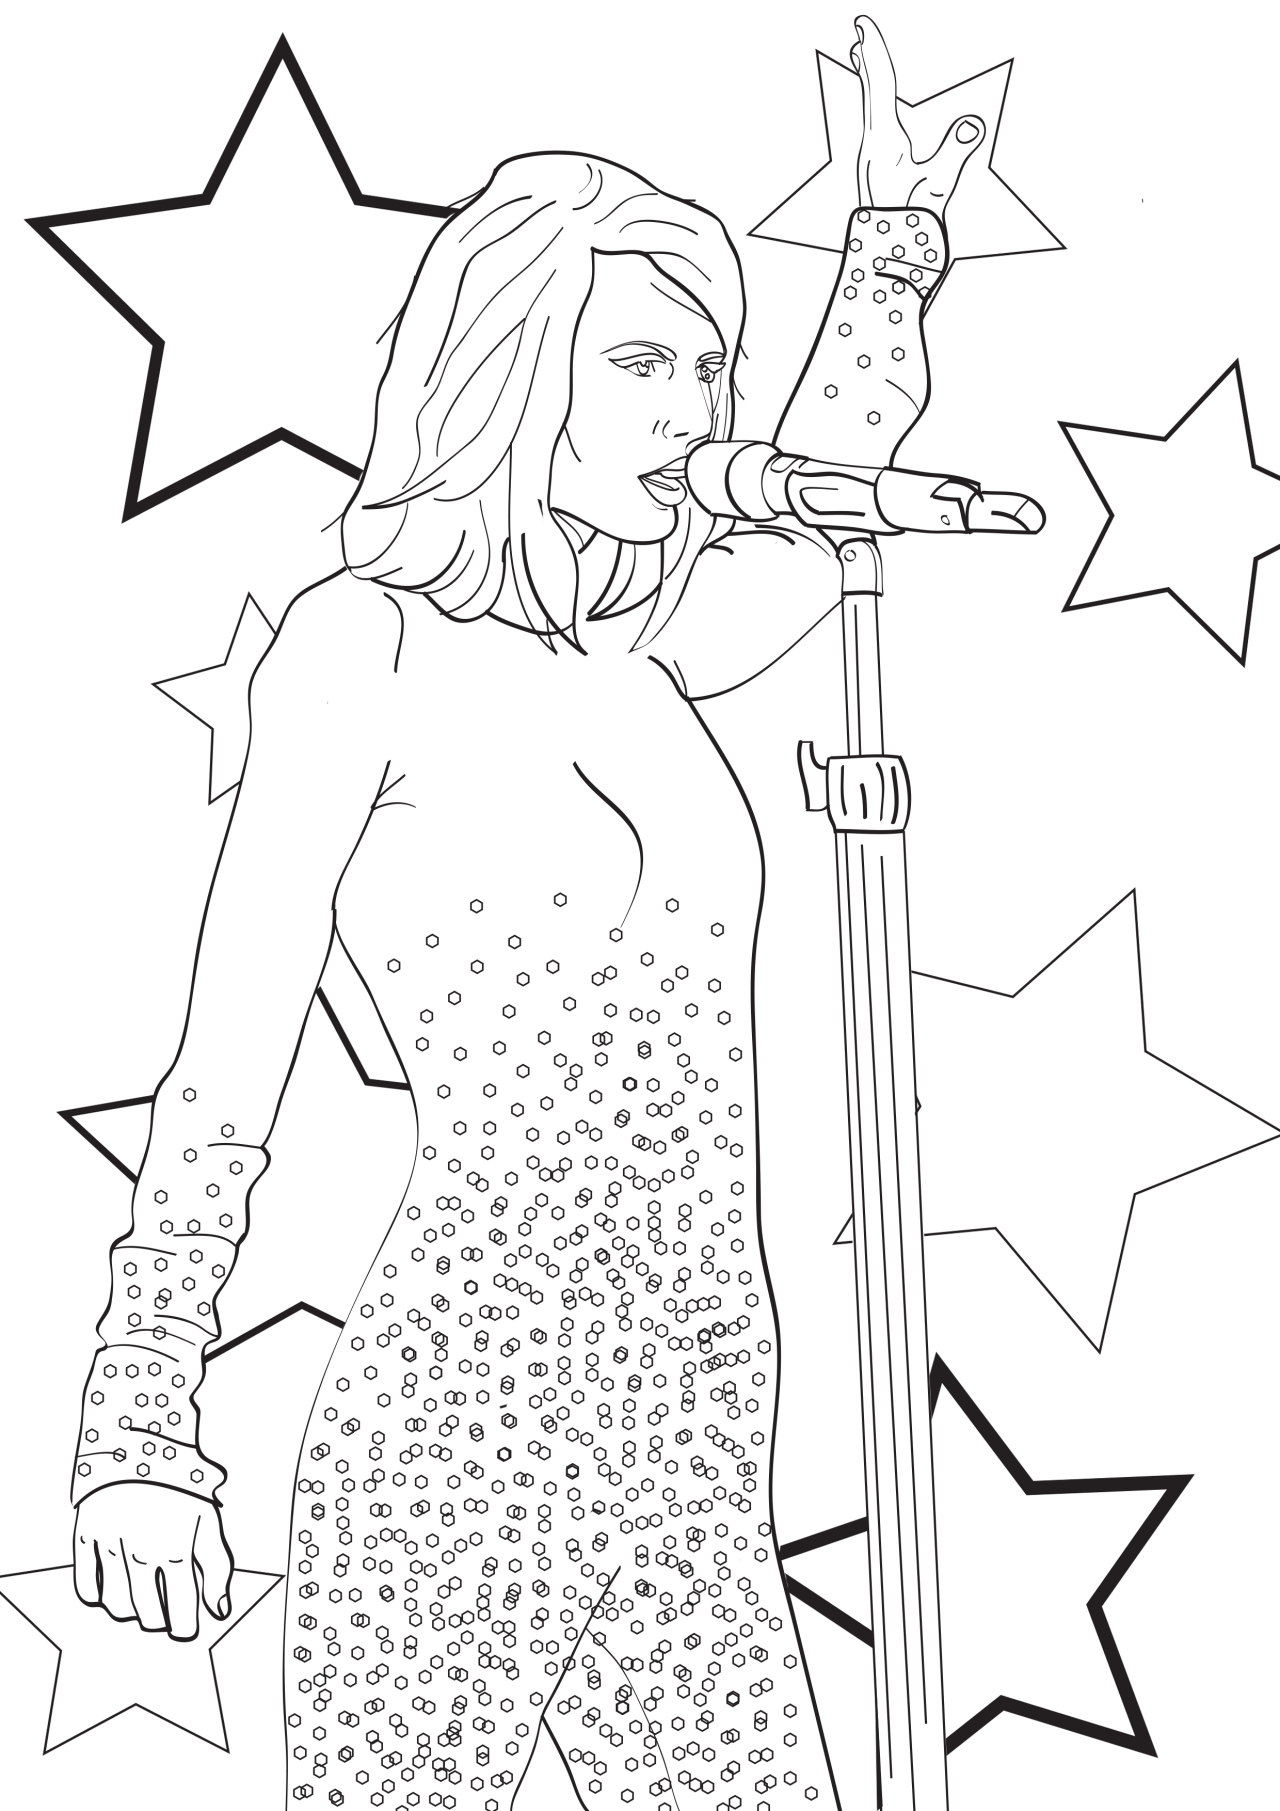 Taylor Swift Singing Coloring Page Free Printable Coloring Pages for Kids